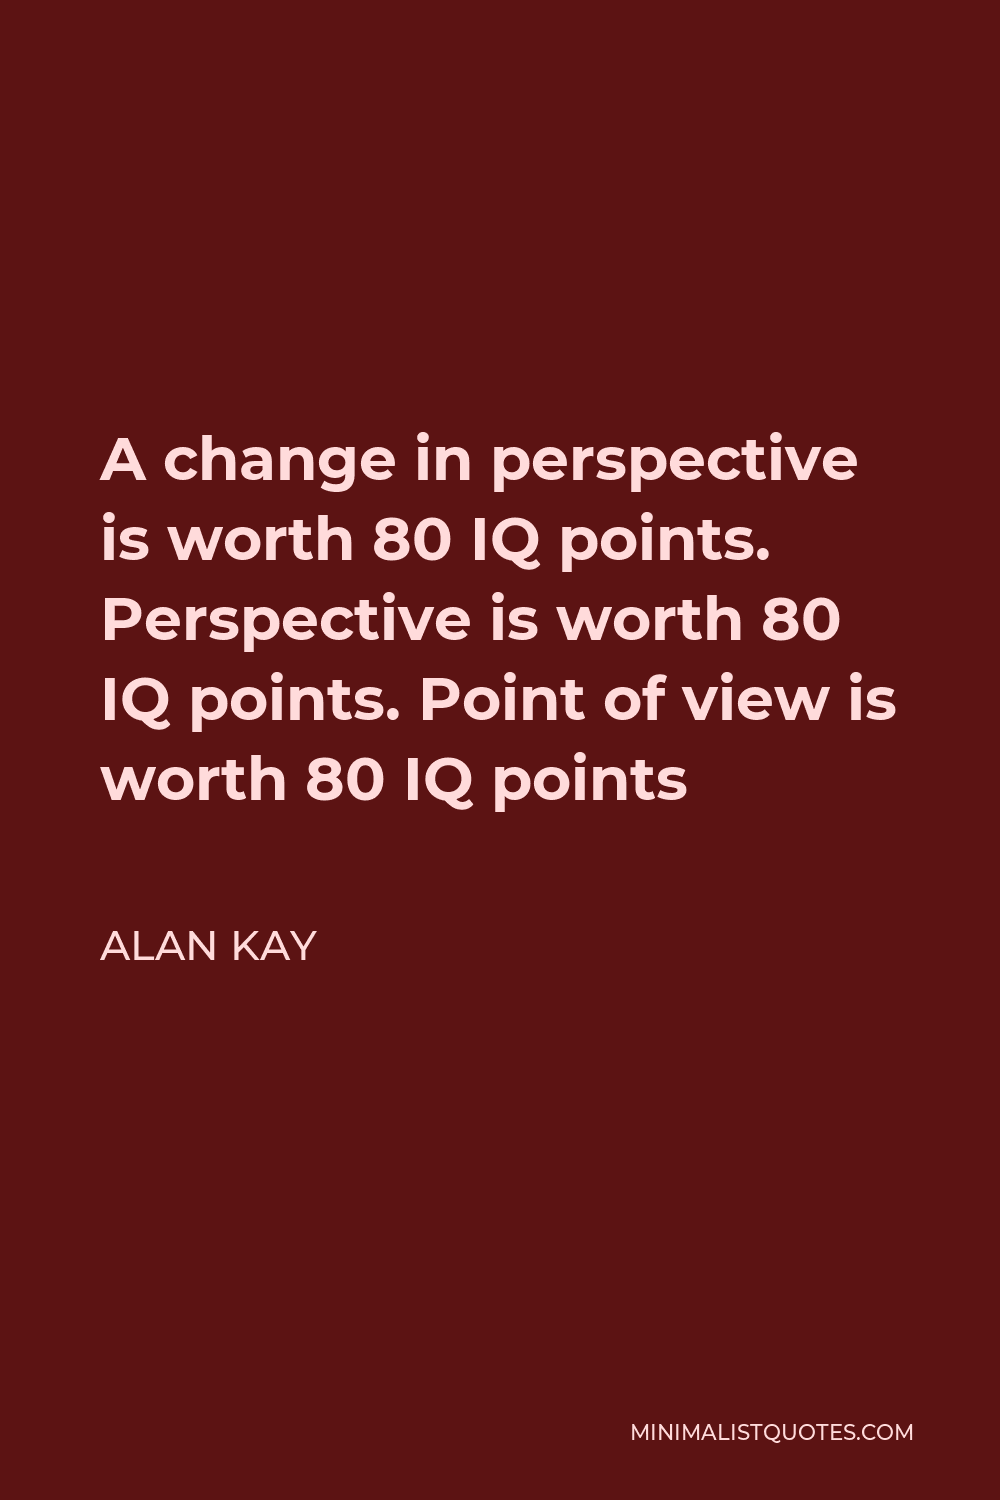 Alan Kay Quote - A change in perspective is worth 80 IQ points. Perspective is worth 80 IQ points. Point of view is worth 80 IQ points